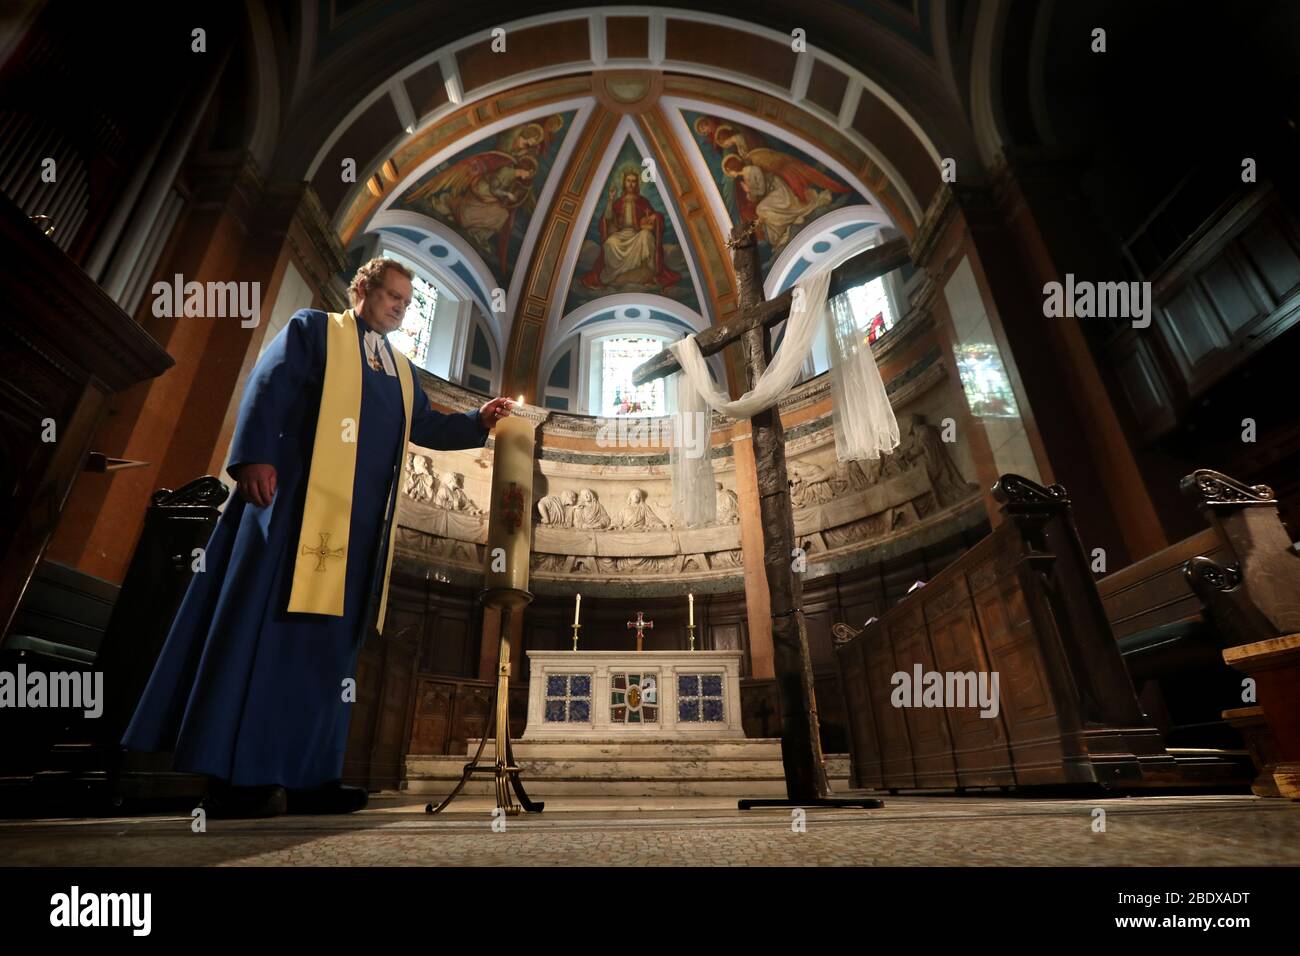 The Rev Peter Sutton lights the Easter candle as he records the Easter Sunday sermon in the Main Sanctuary at the Parish Church of St Cuthbert in Edinburgh, the church has been streaming sermons as the UK continues in lockdown to help curb the spread of the coronavirus. Stock Photo